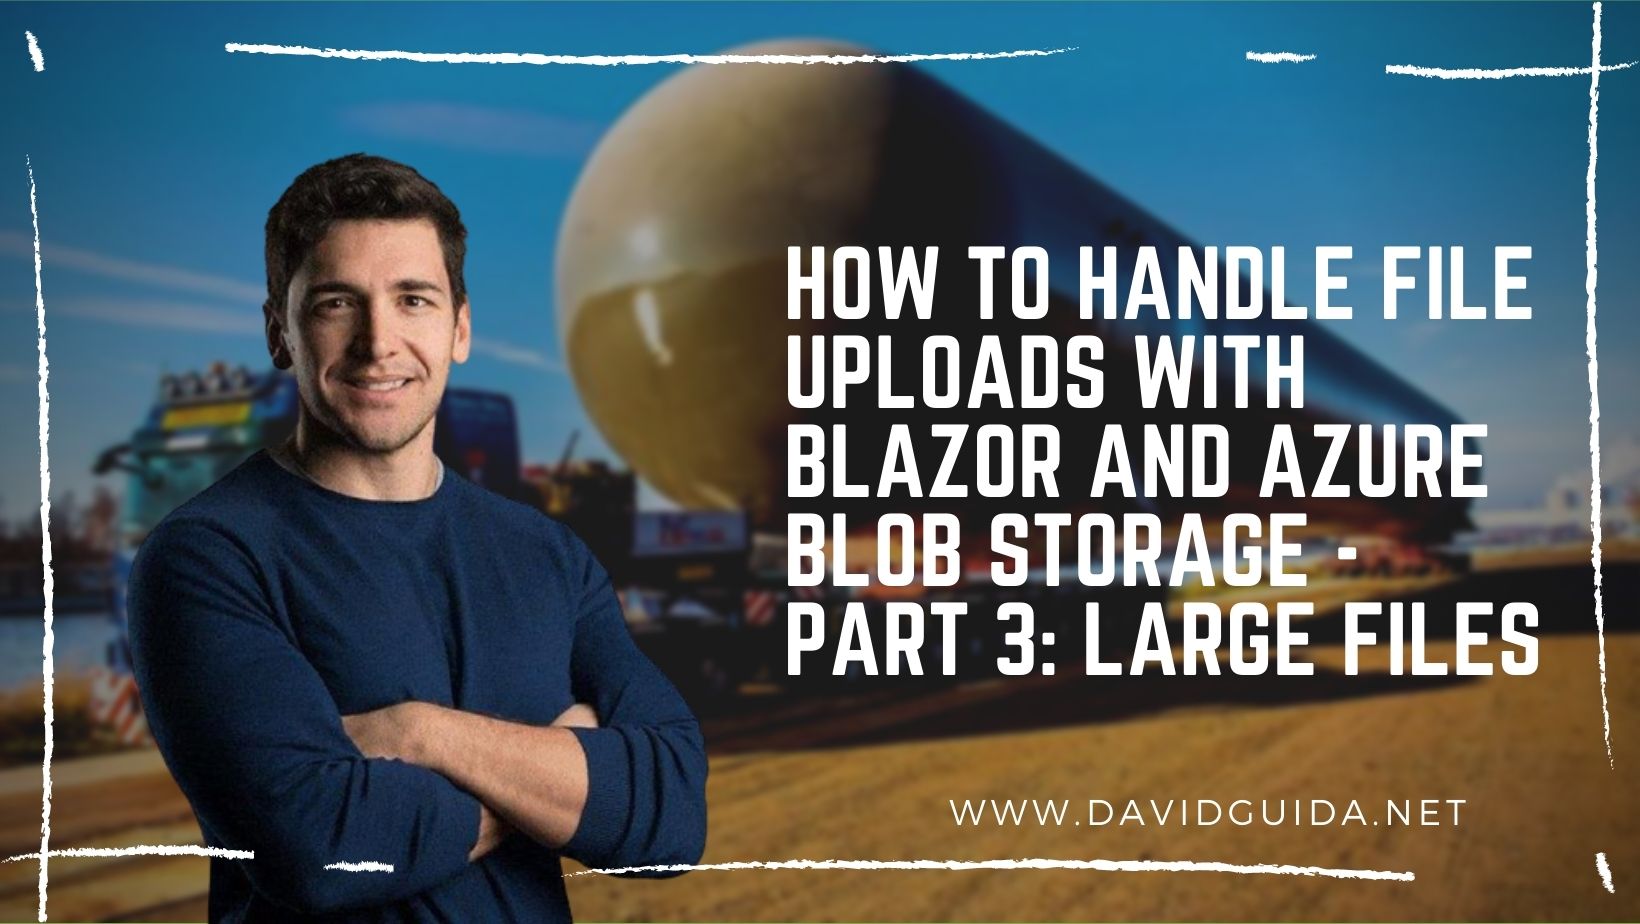 How to handle file uploads with Blazor and Azure Blob Storage - part 3: large files